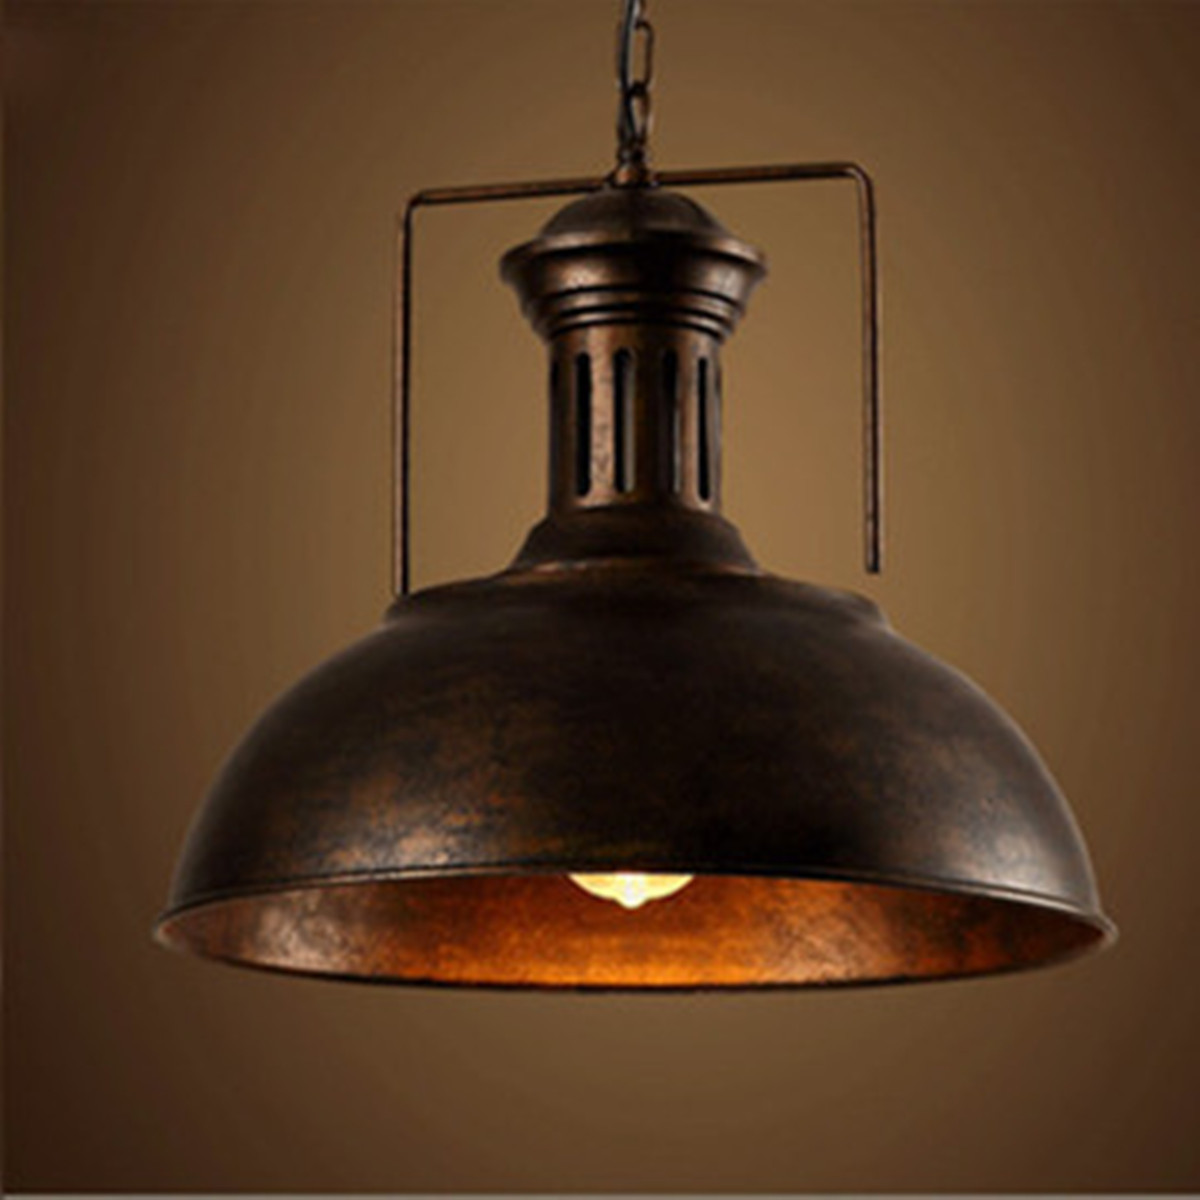 Vintage-Retro-Industrial-Cafe-Ceiling-Light-Fixture-Lamp-Shade-Home-Decor-1085619-1